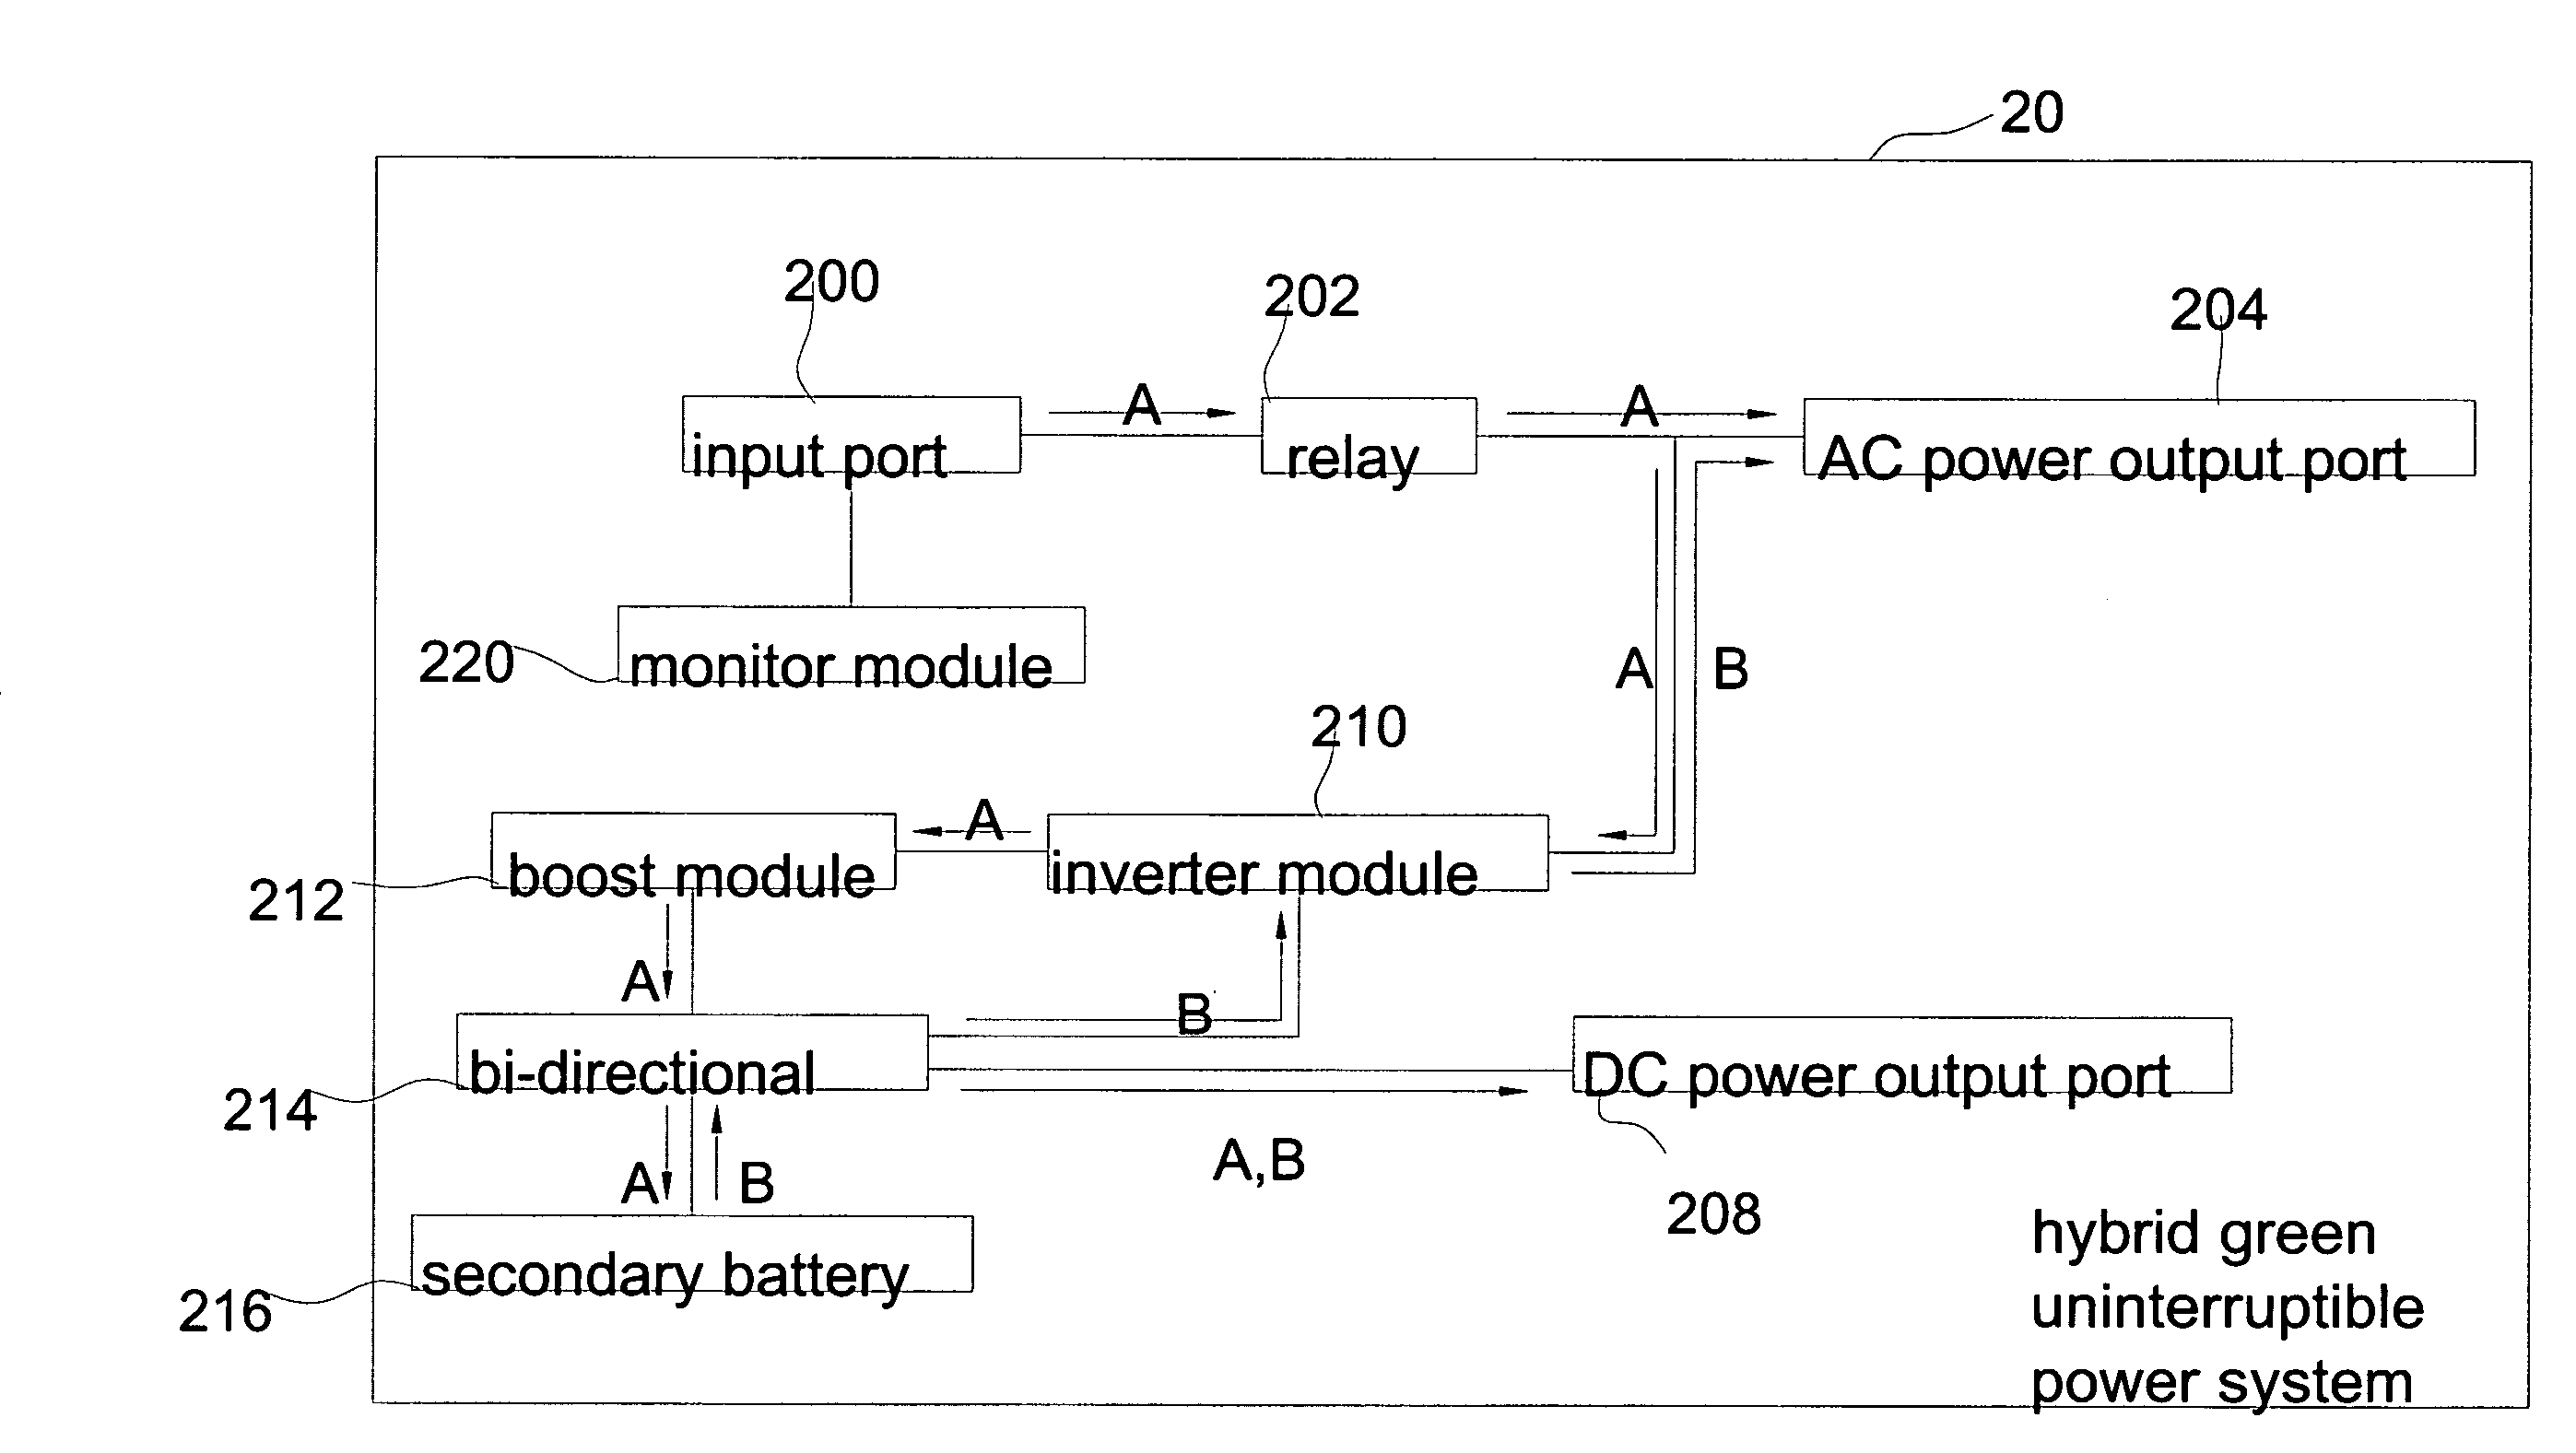 Hybrid green uninterruptible power system and bi-directional converter module and power conversion method thereof